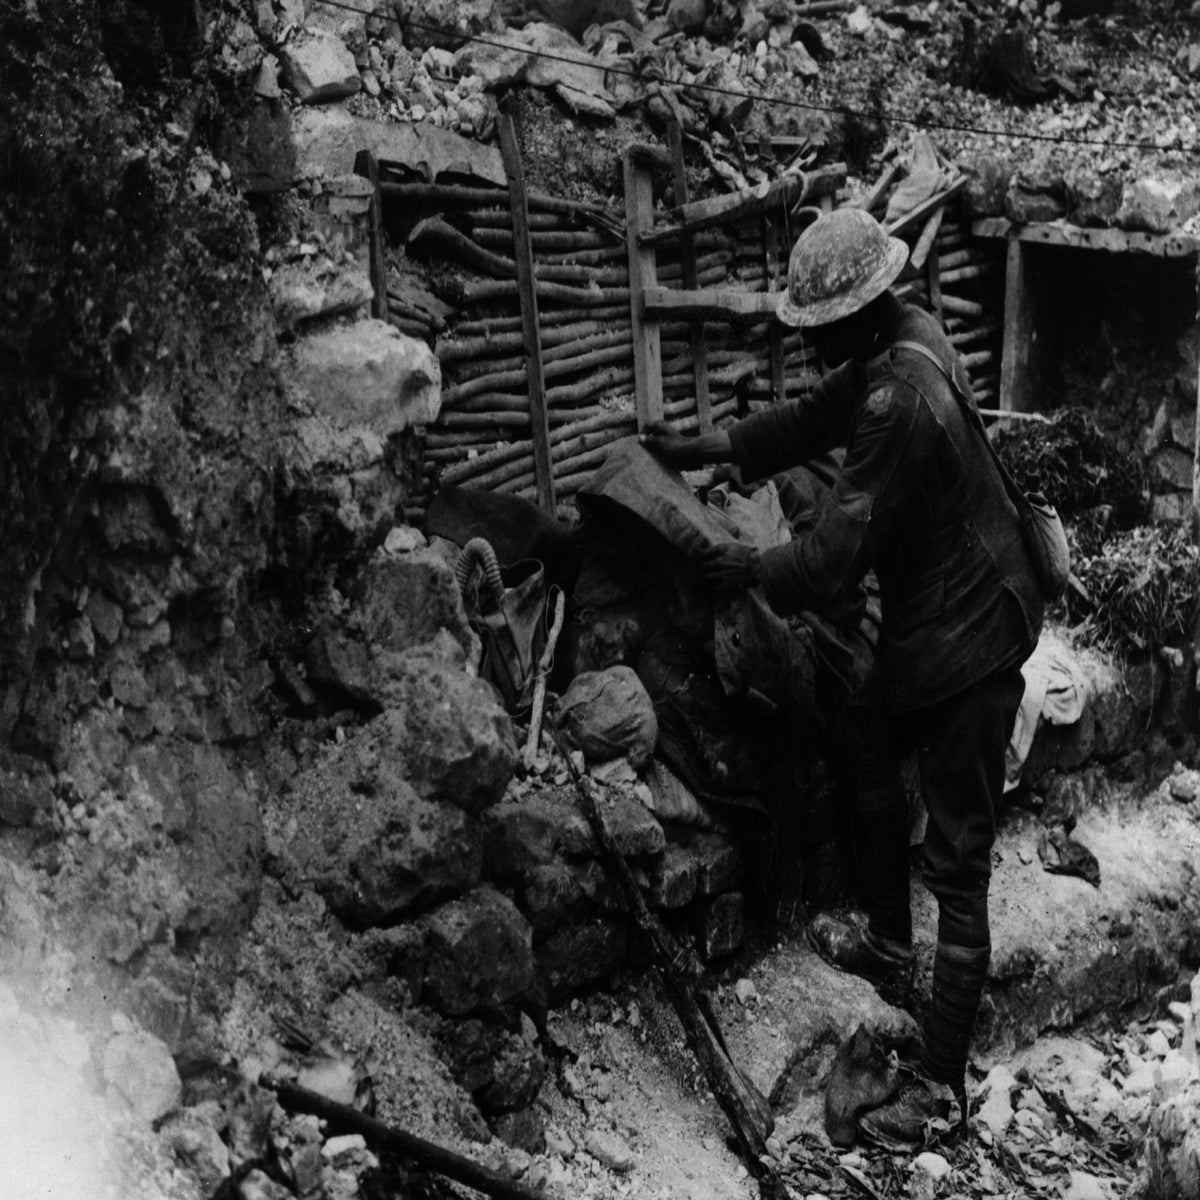 A captured soldier suffering from Shell Shock, The Somme; ca. 1916